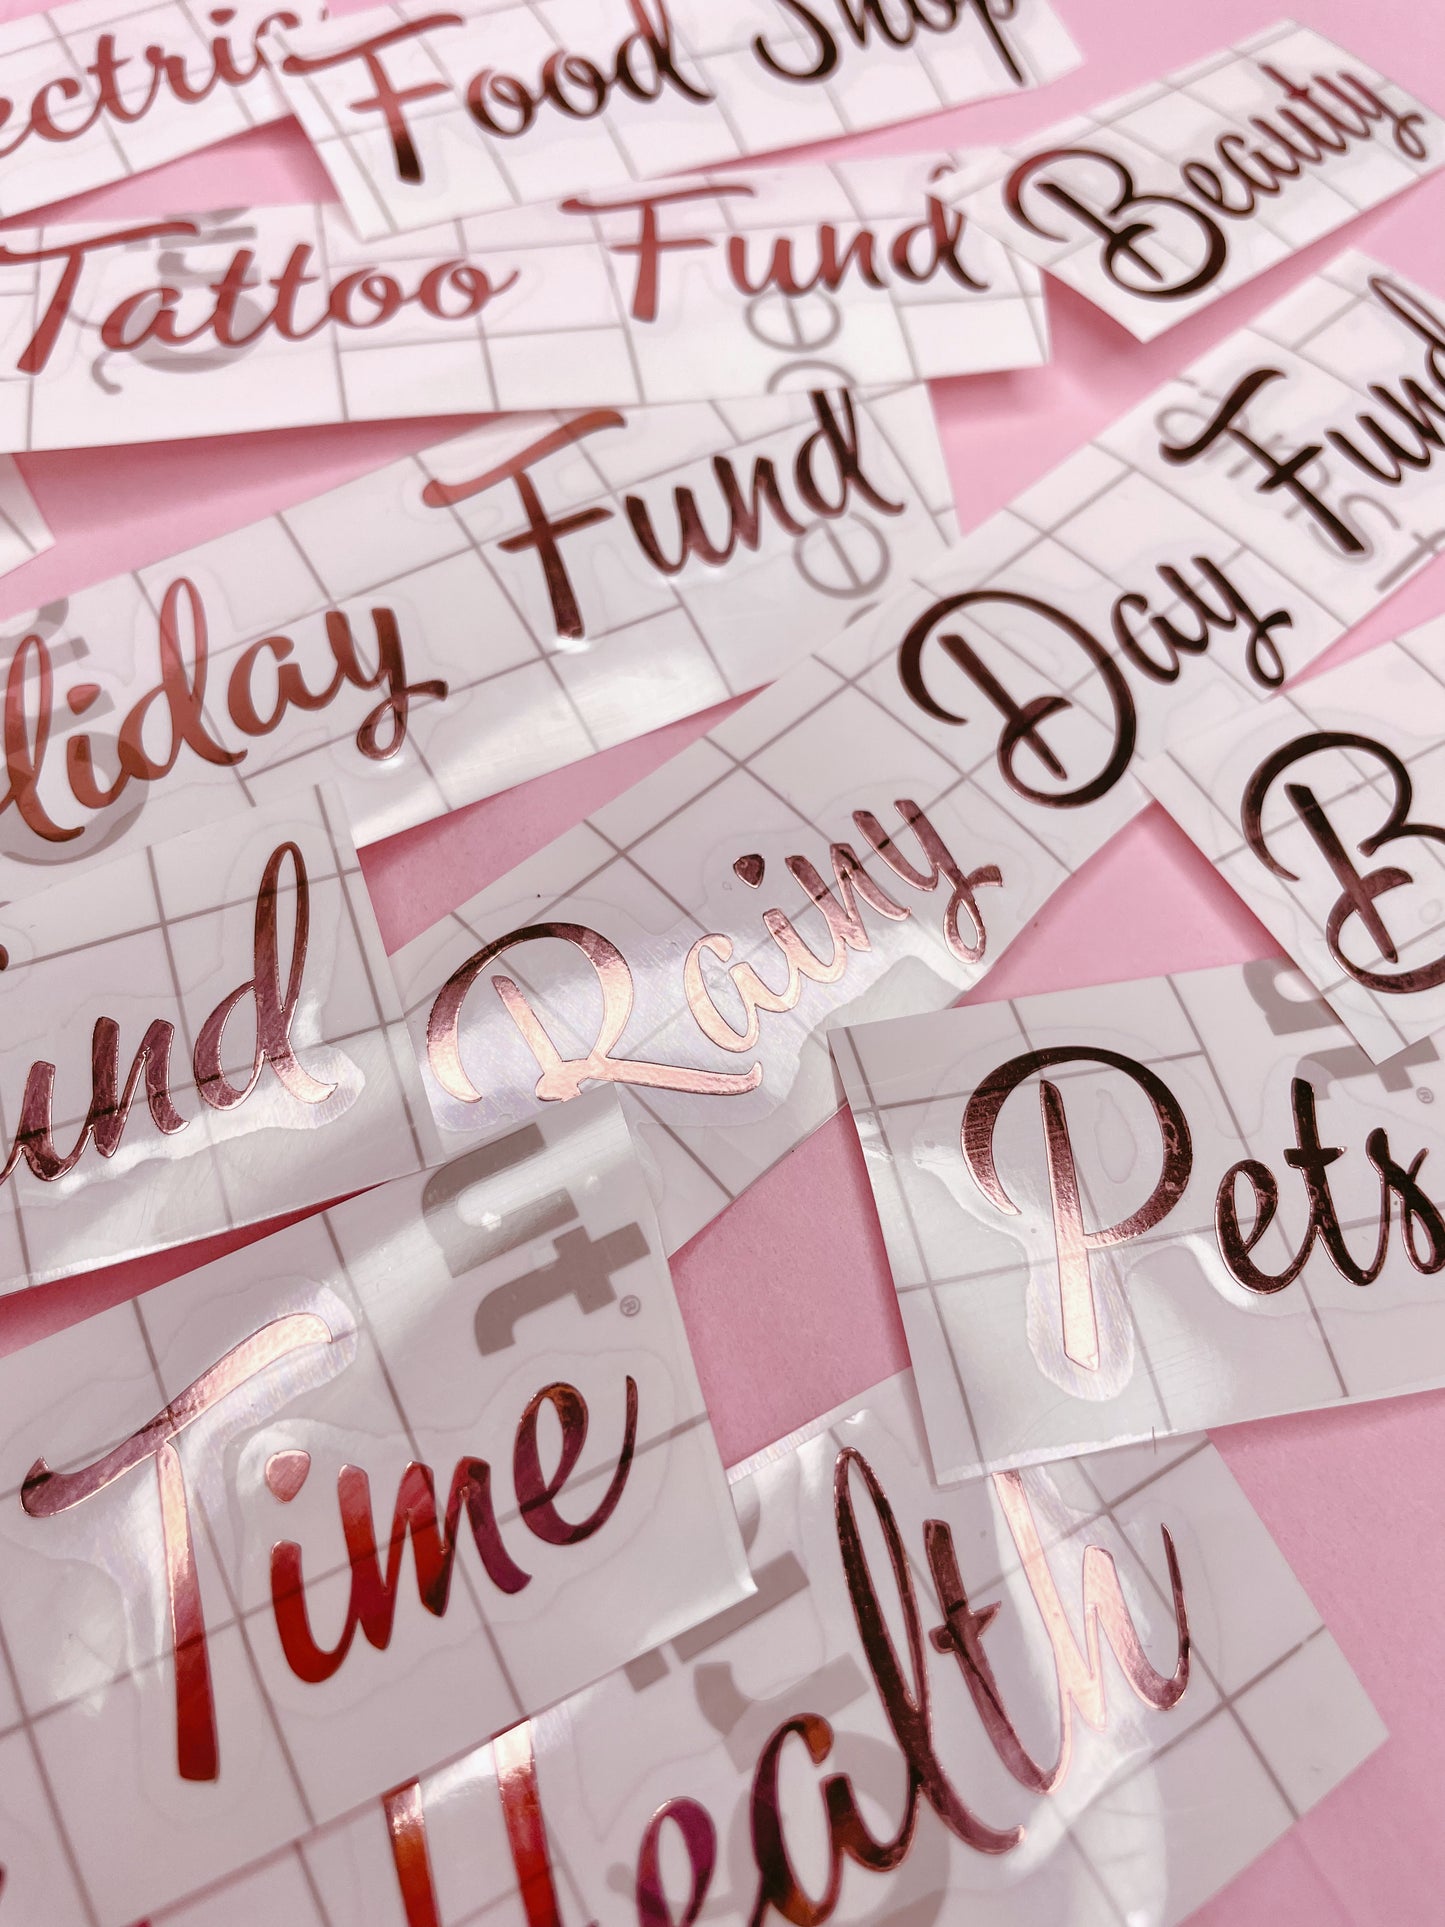 Vinyl Category Stickers for Cash Stuffing Wallets